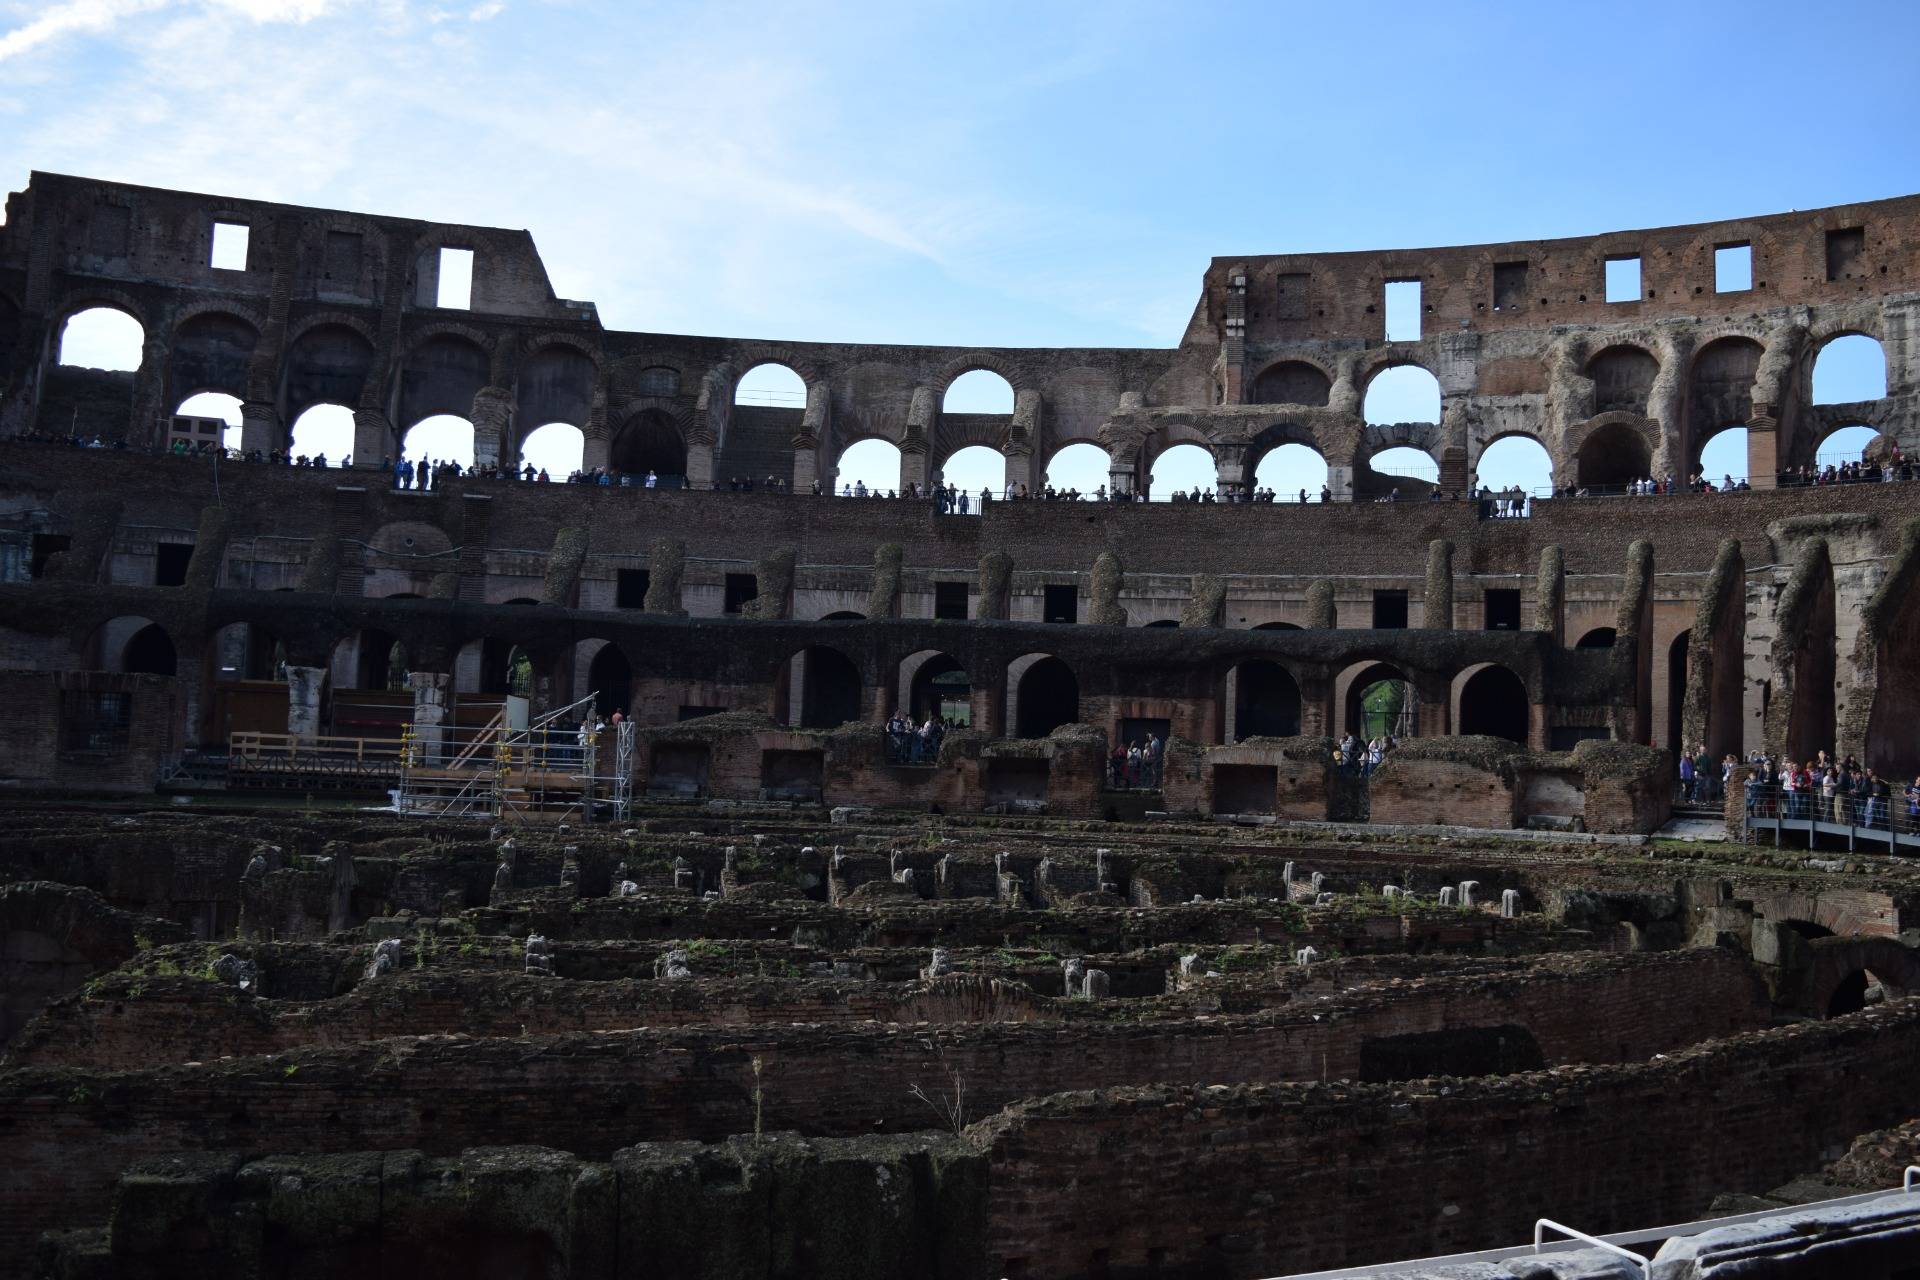 Checking out the lower levels of the Colosseum